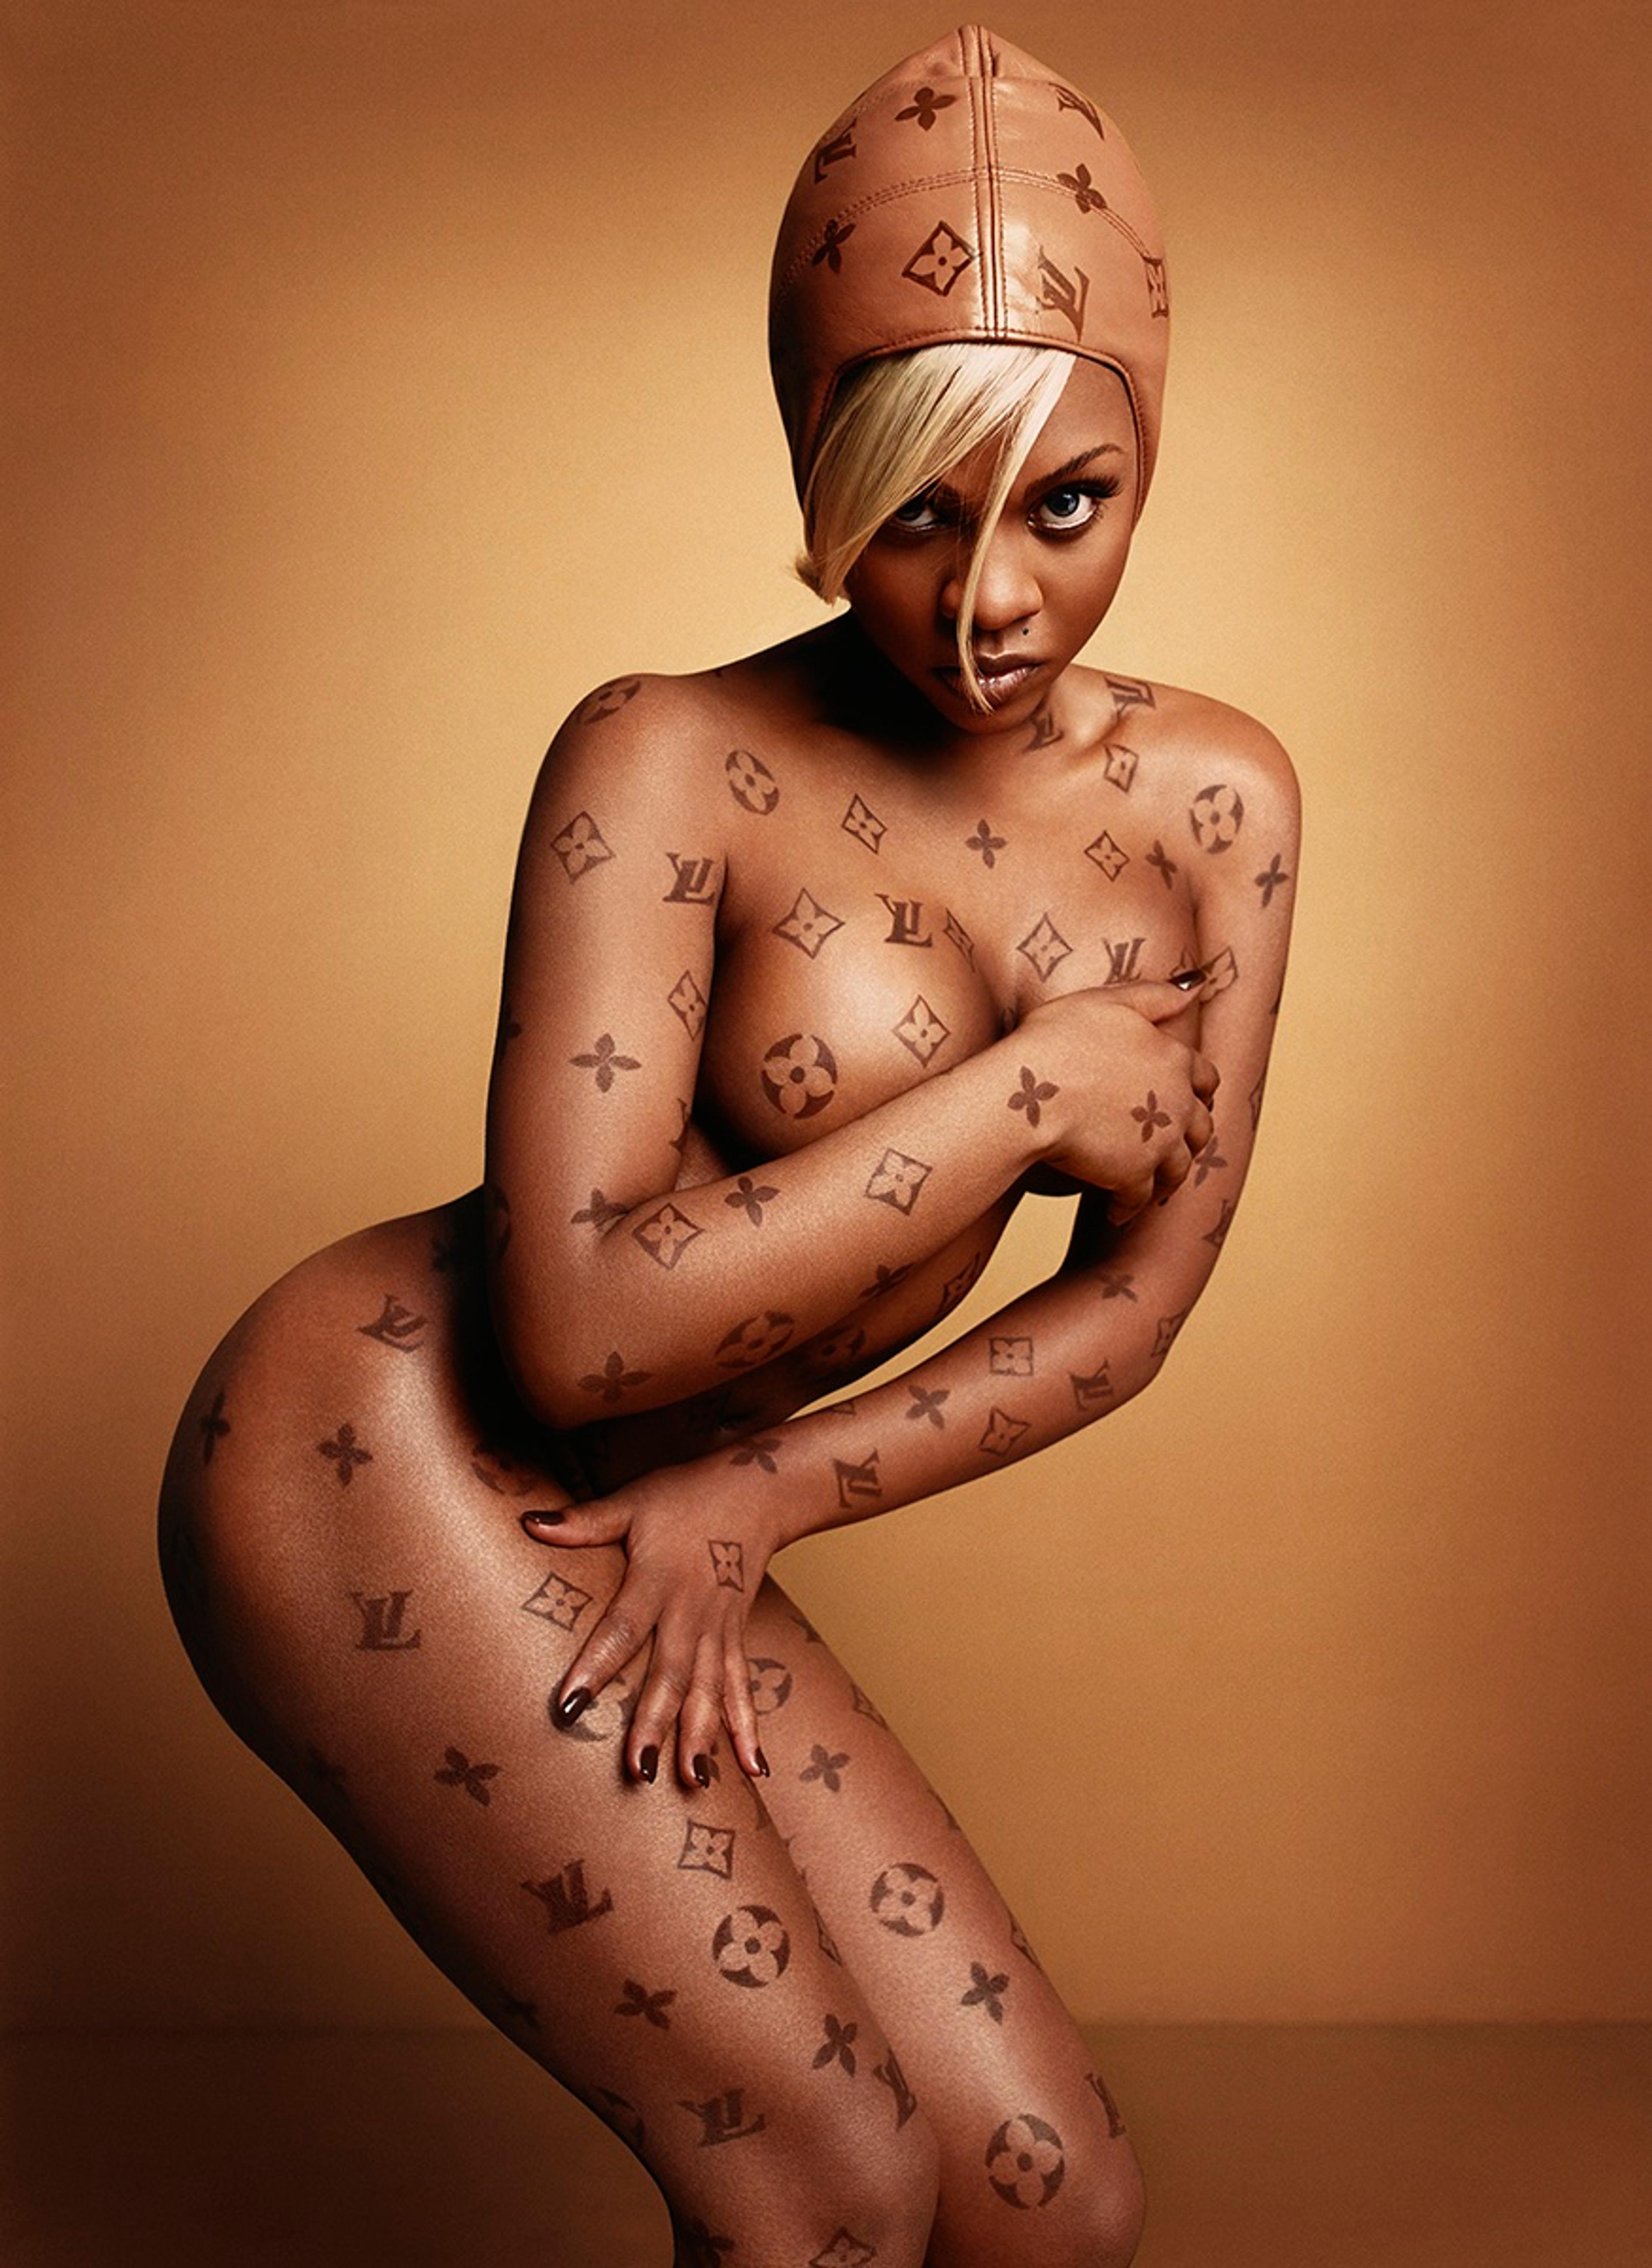 A photograph of a nude woman covered in Louis Vuitton logomarks